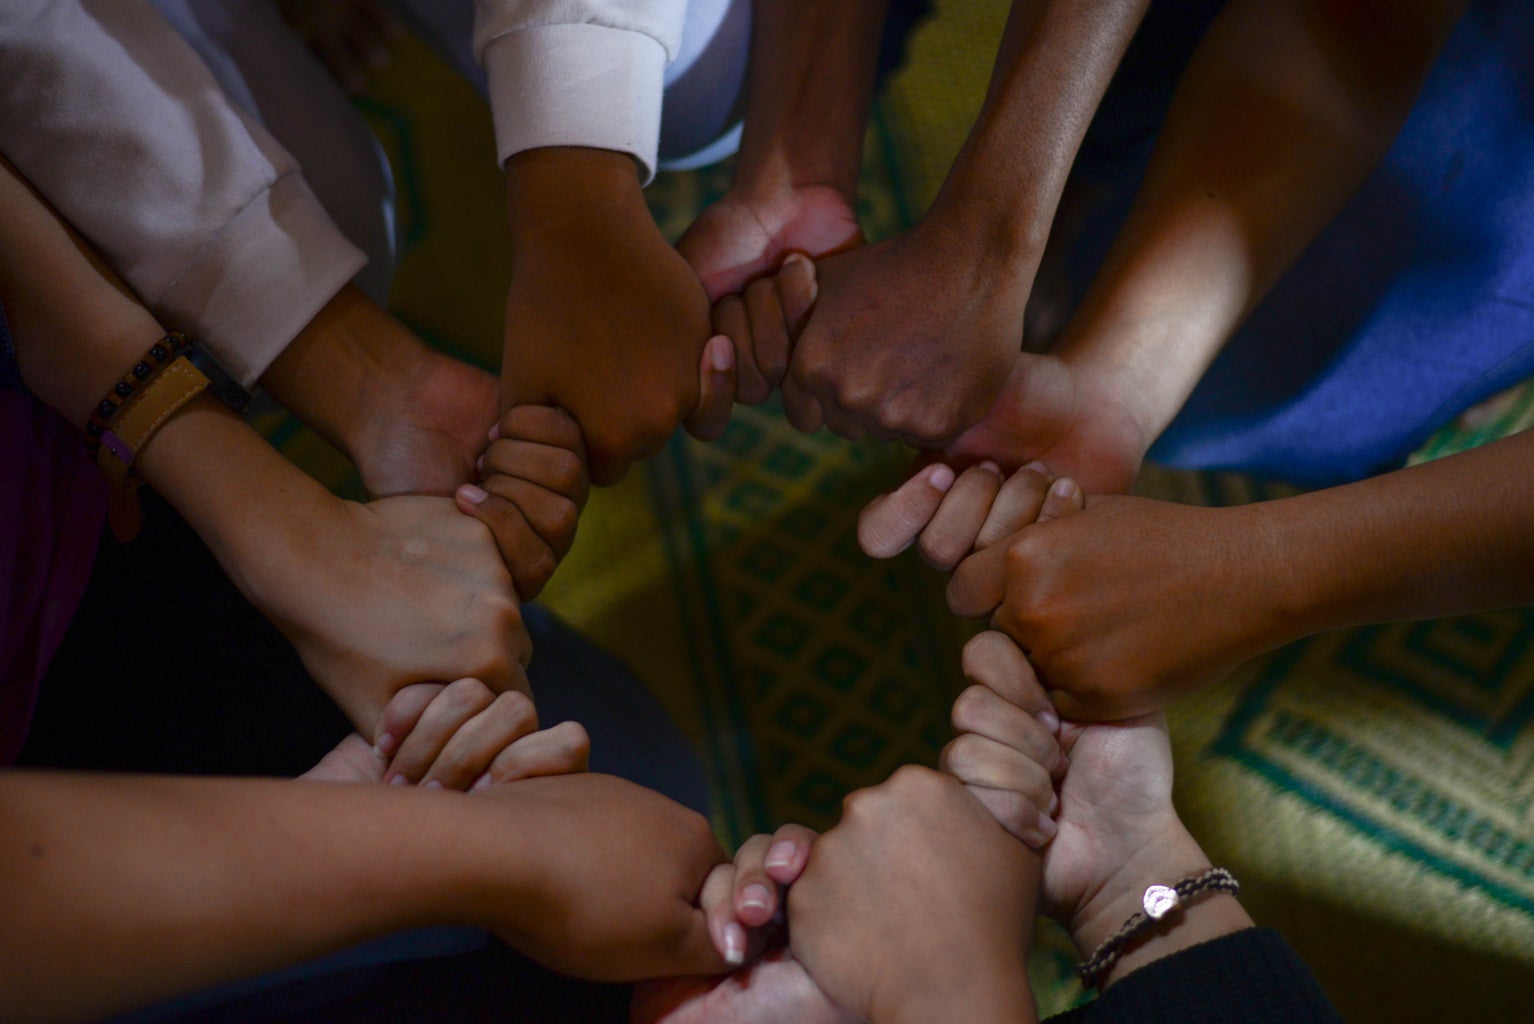 group of diverse people holding hands